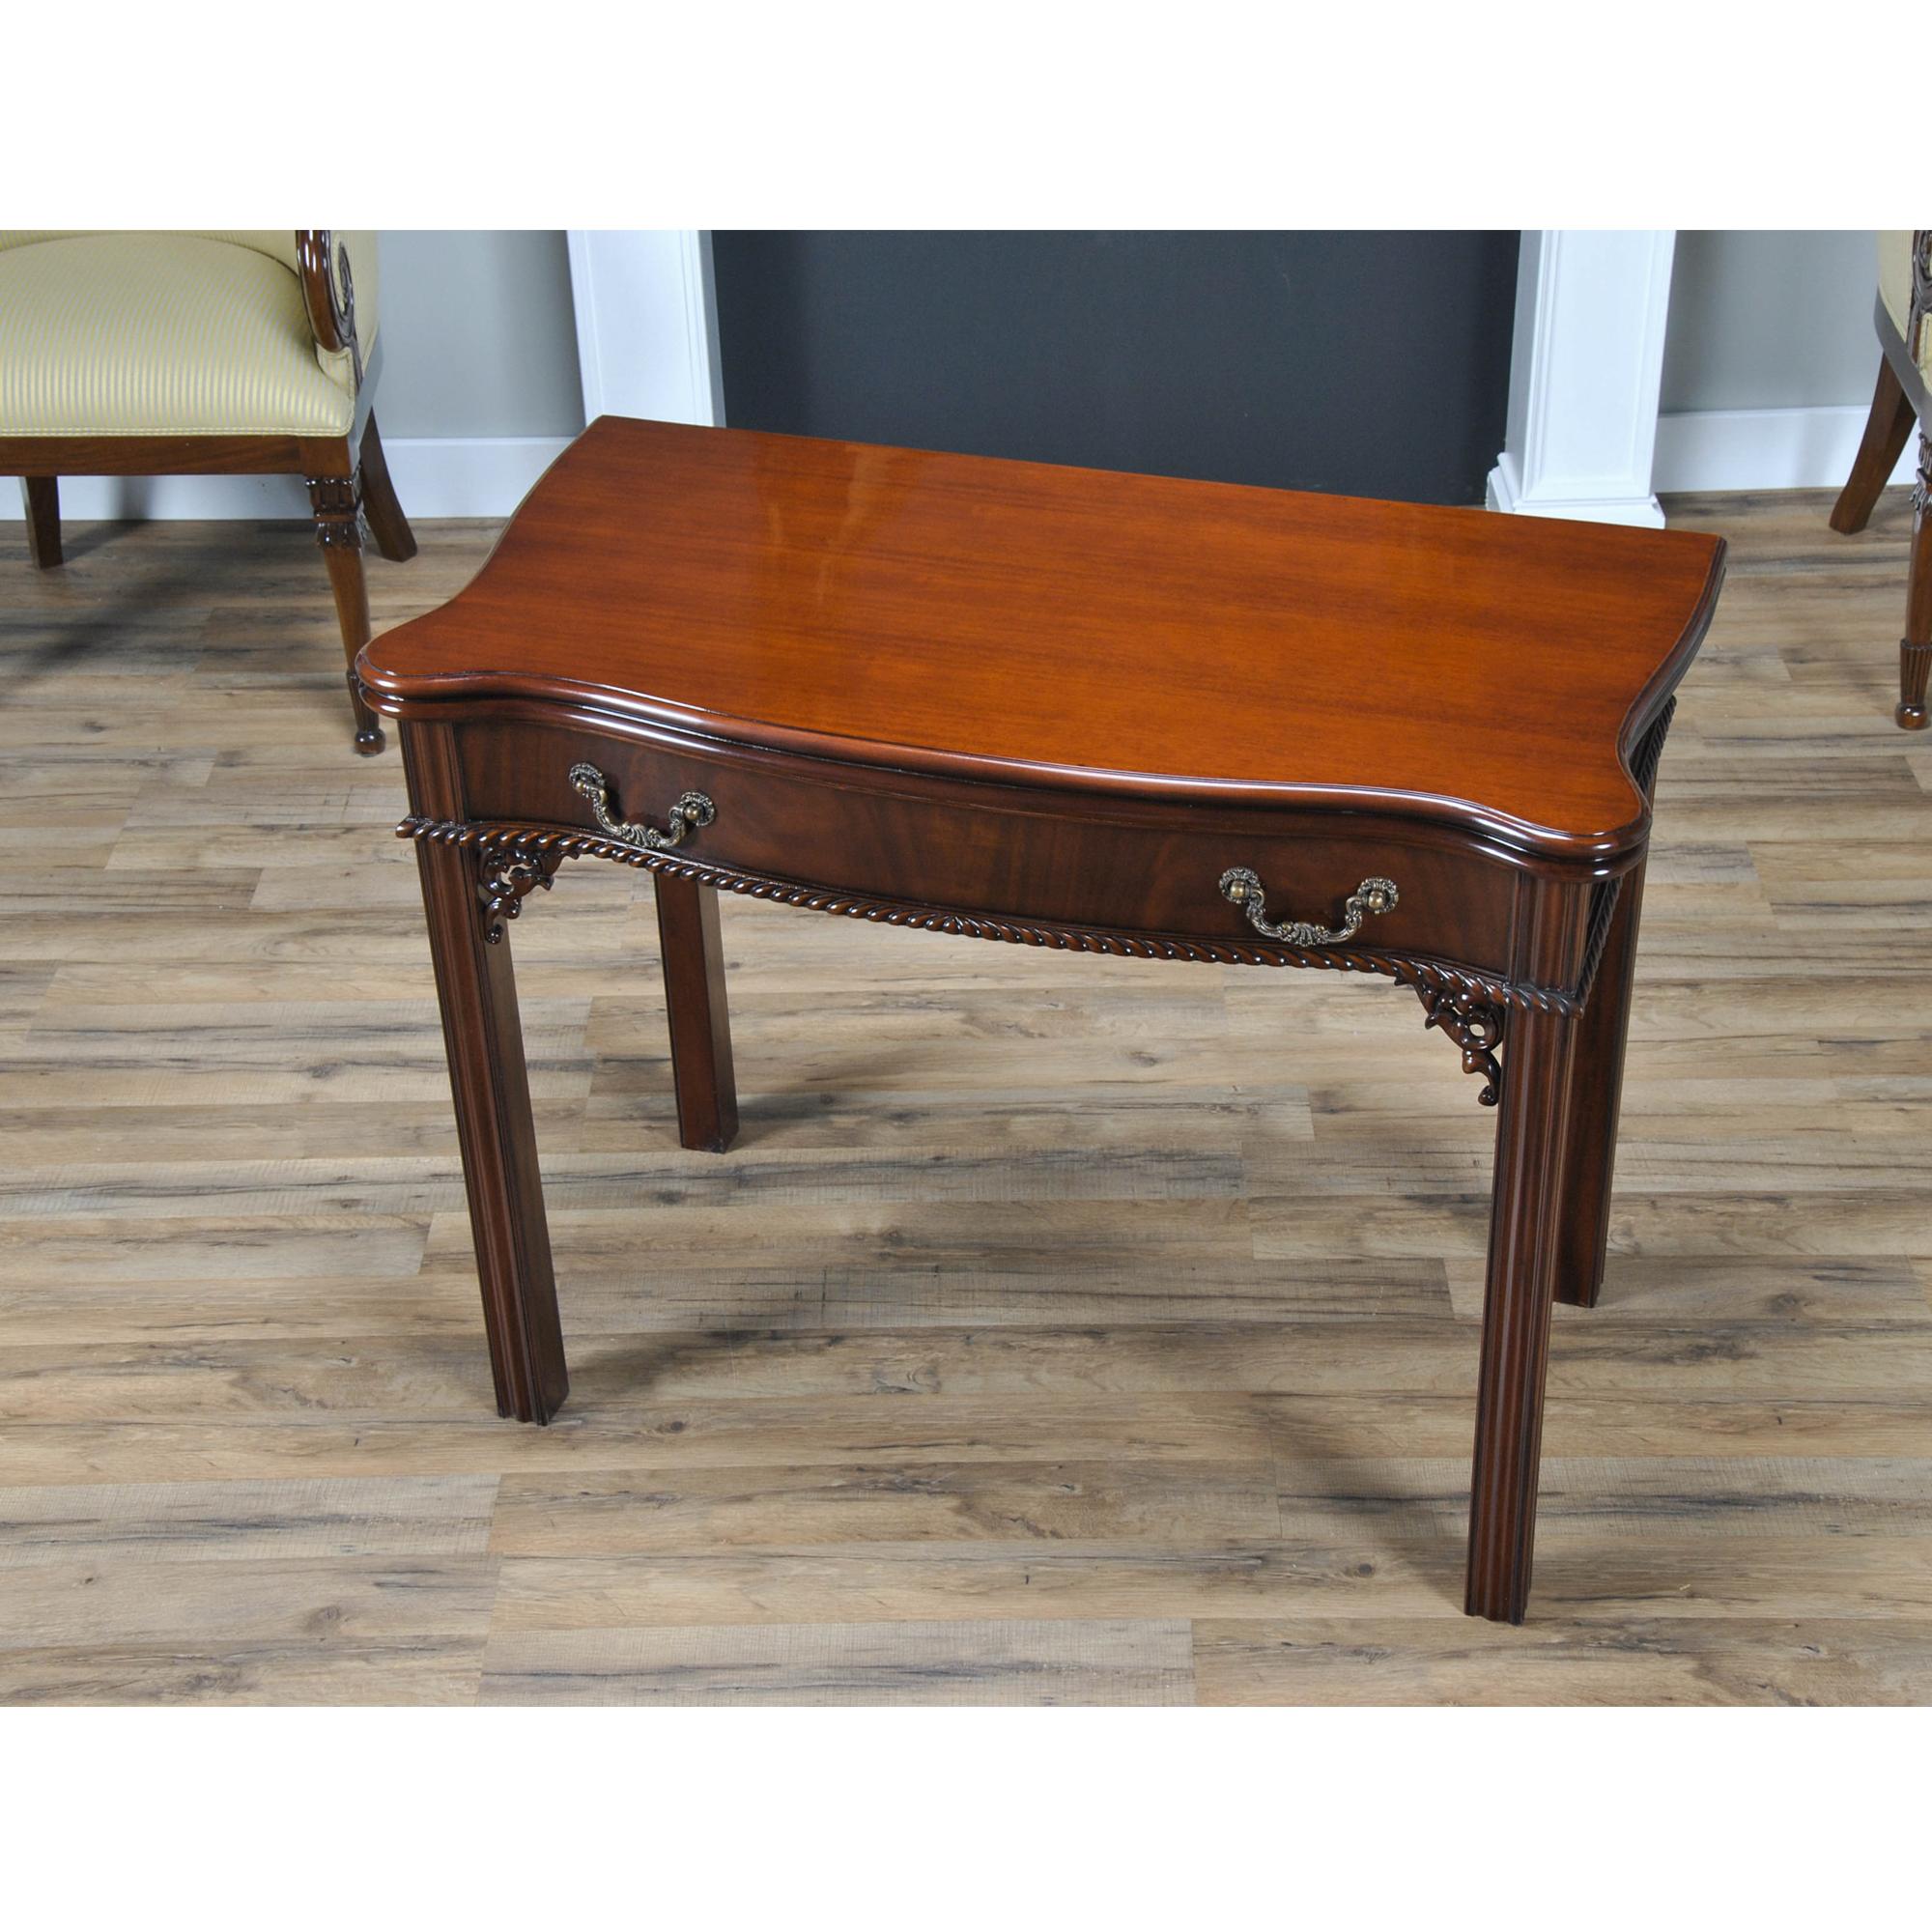 This large straight leg Mahogany Chippendale Game Table has a serpentine top with figural mahogany grain and a crisply moulded edge. The flamed veneered frieze with high quality rococo style hardware and fine gadroon carving sits above pierced and